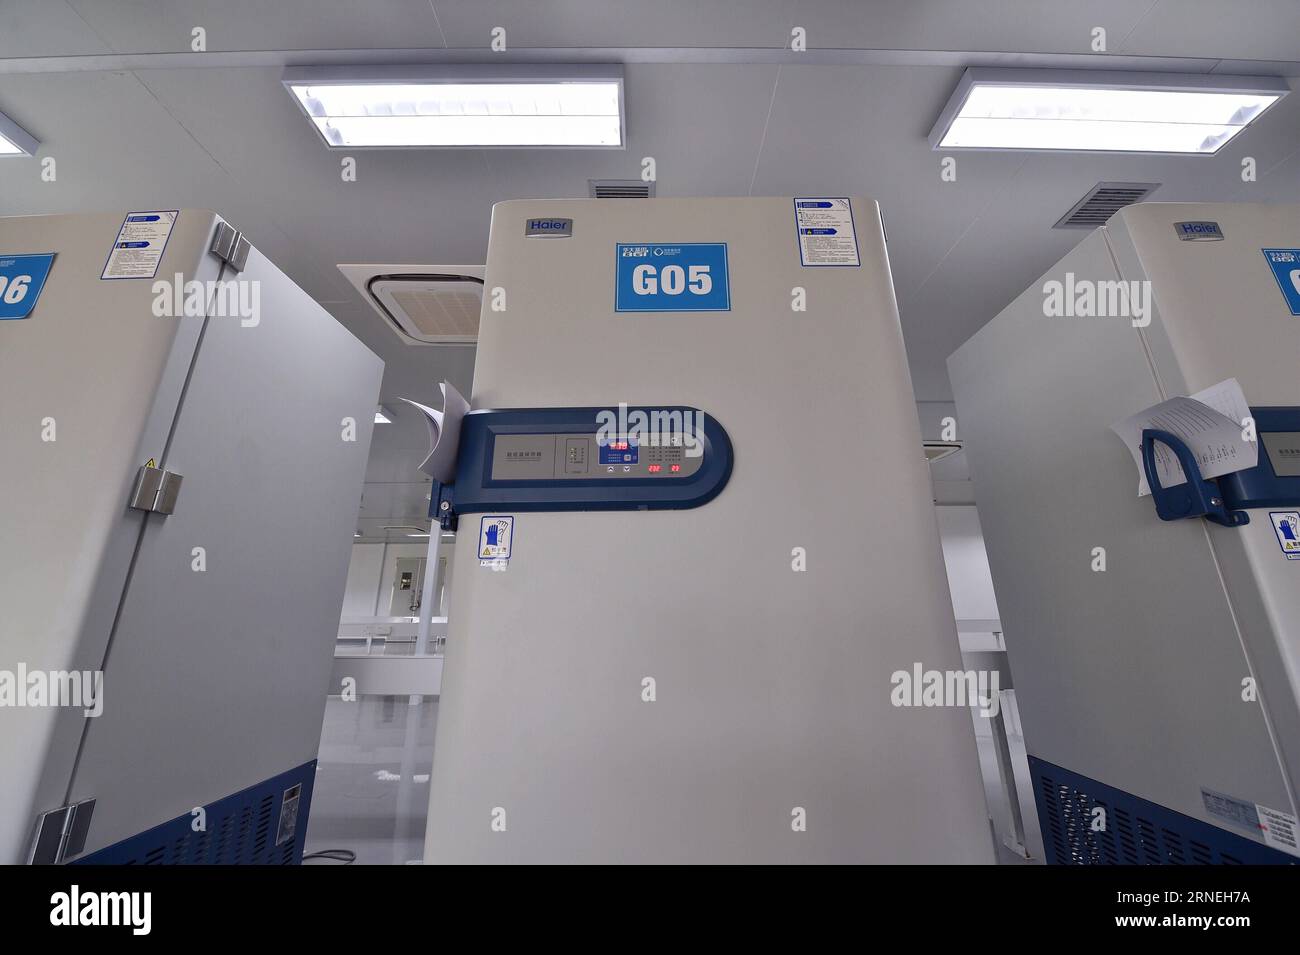 (160623) -- SHENZHEN, June 23, 2016 -- Photo taken on June 23, 2016 shows a refrigerator at the national gene bank in Shenzhen, south China s Guangdong Province. A national gene bank built by China s gene research giant BGI started trial operation on June 18 in the southern Chinese city of Shenzhen. The gene bank has a collection of 10 million samples of biological resources. Approved by the National Development and Reform Commission in 2011, the facility is dedicated to storing and managing the country s unique genetic resources and data, as well as biological information. )(mcg/yxb) CHINA-SH Stock Photo